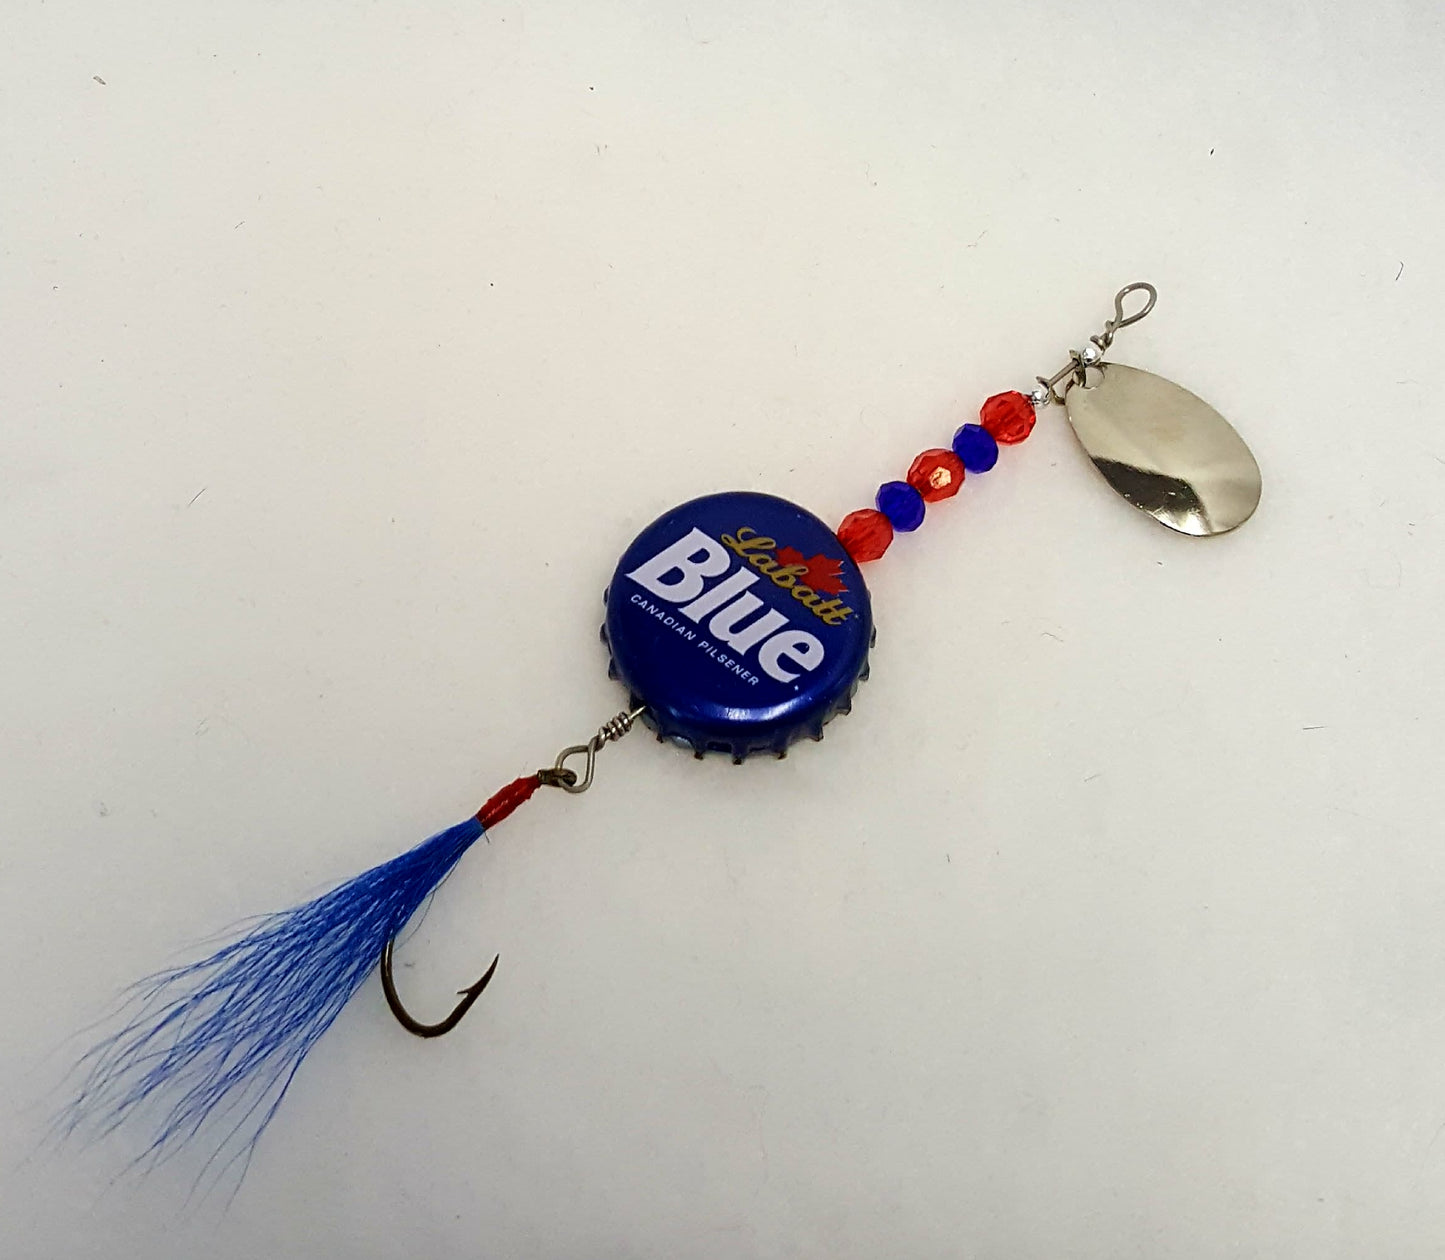 Lure has a blue bottle cap with red & blue beads, and blue fly.